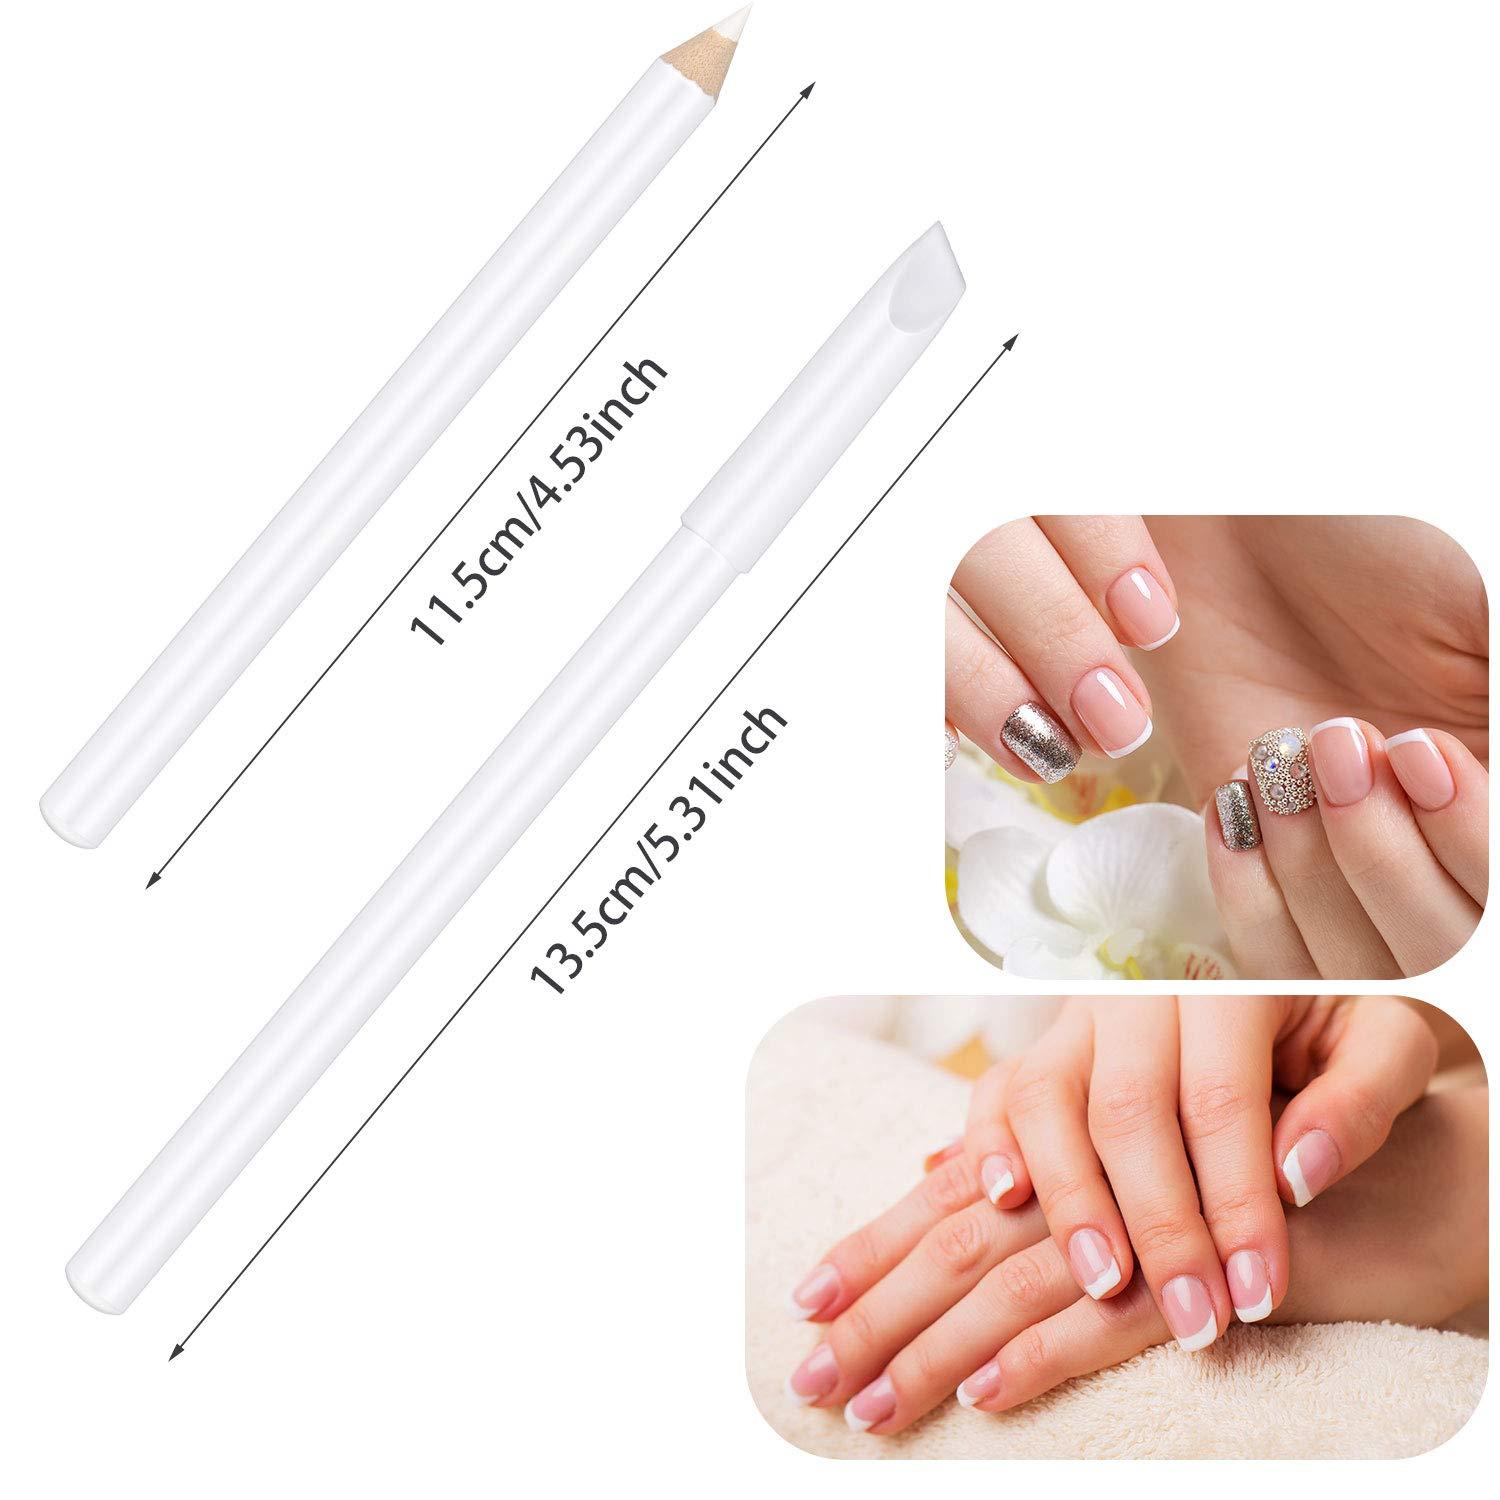 Flowery Nail White Pencil with Cuticle Pusher Cap - Set of 3 